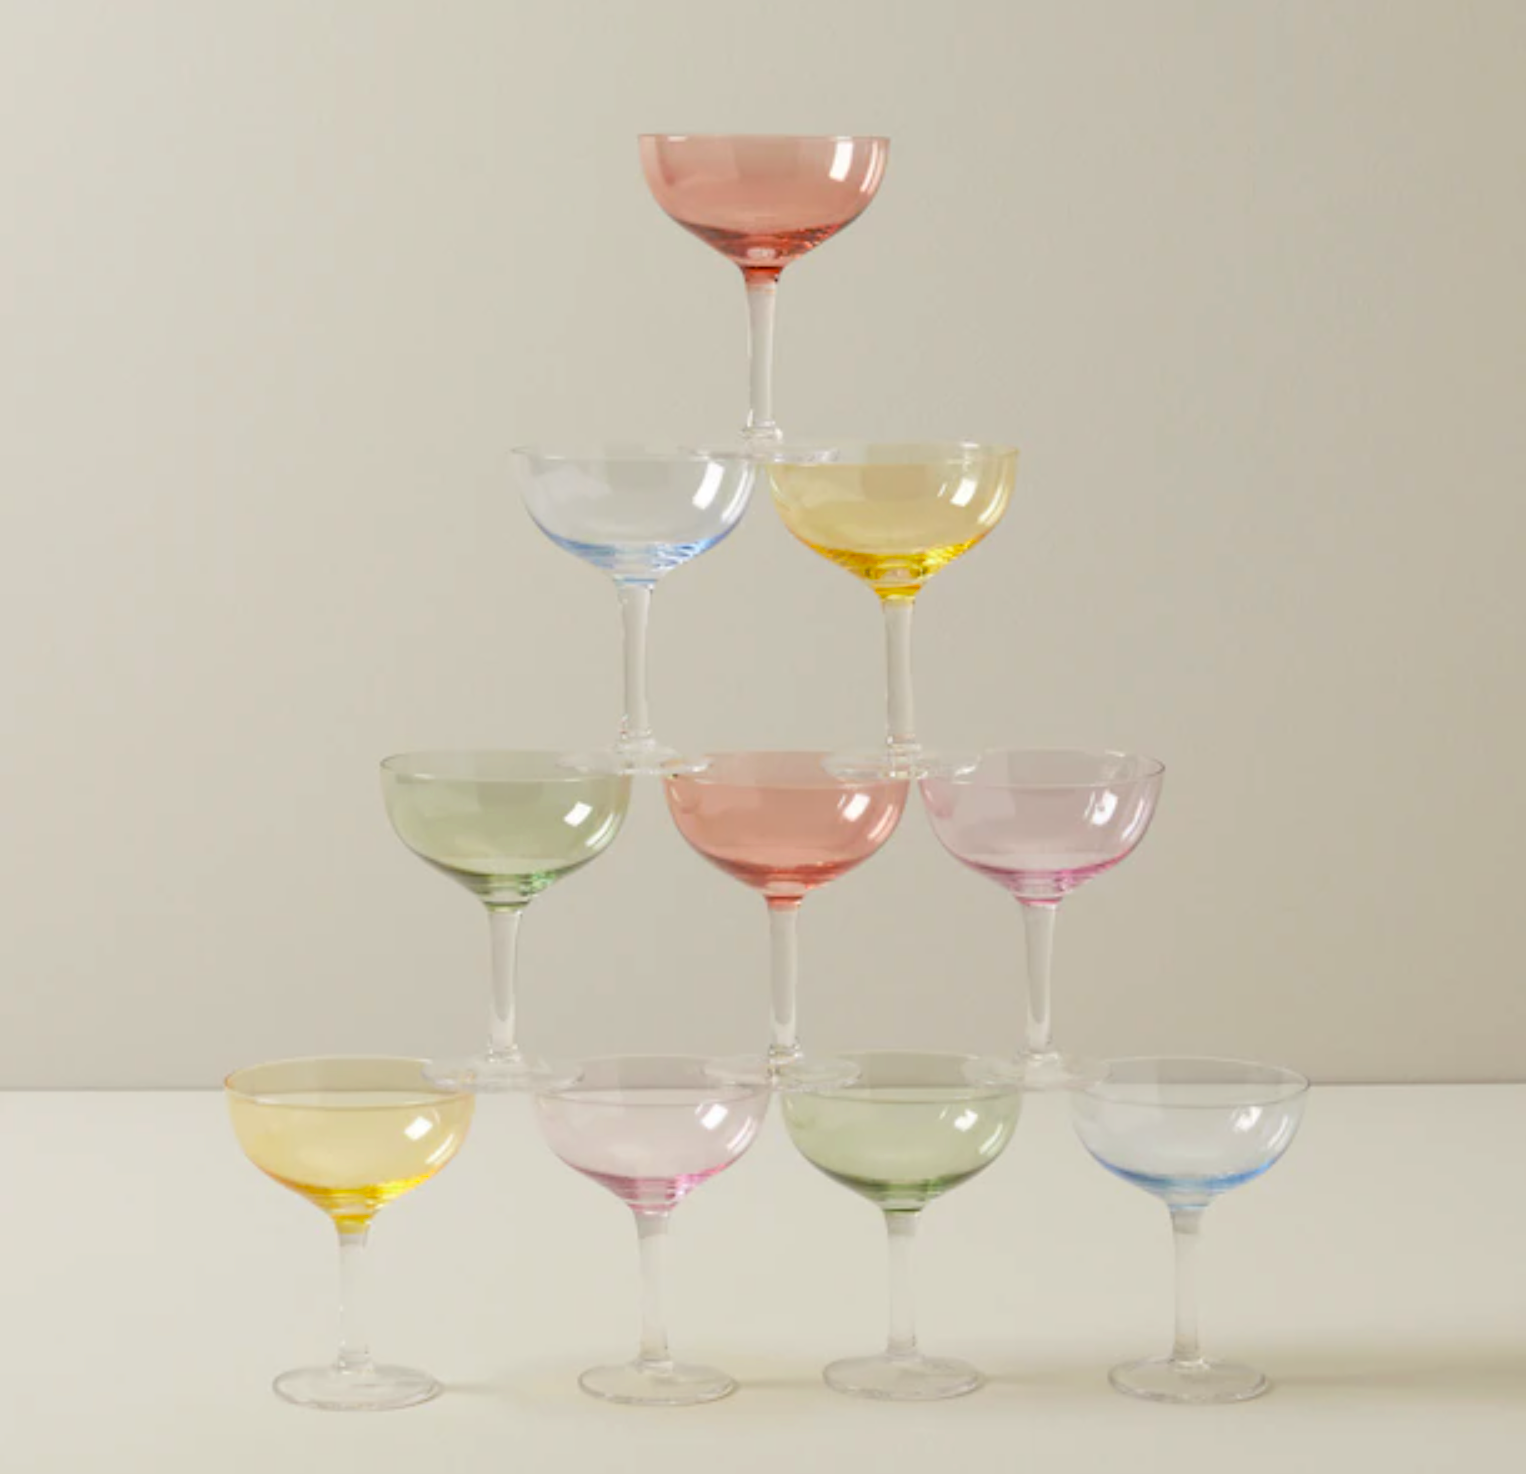 The coupe glasses stacked in a pyramid